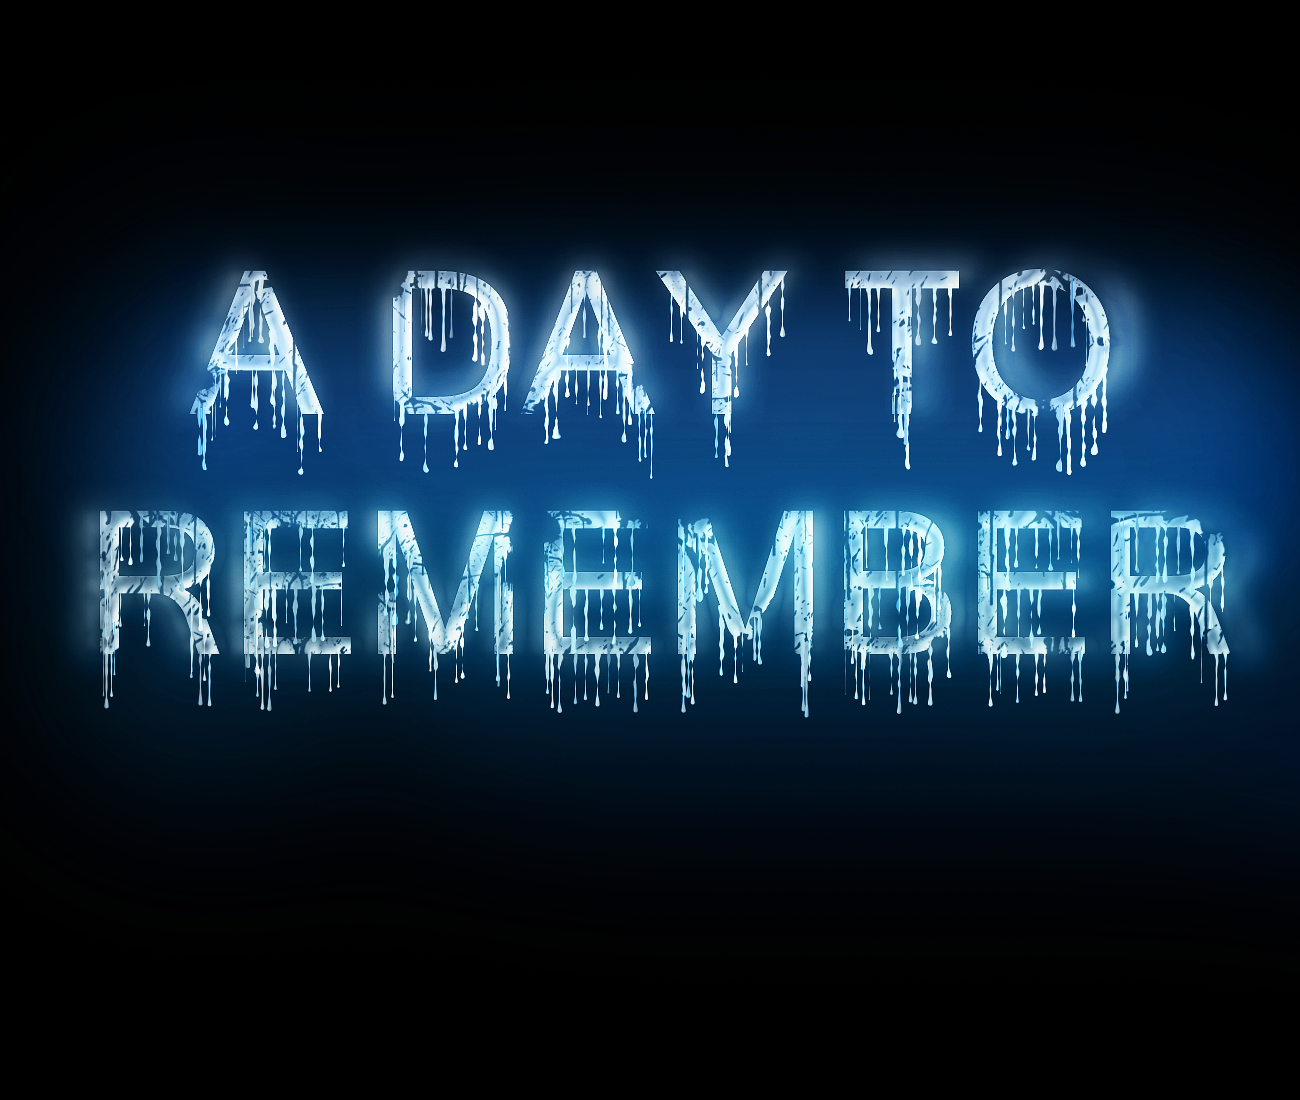 A Day To Remember Wallpaper By Pato92